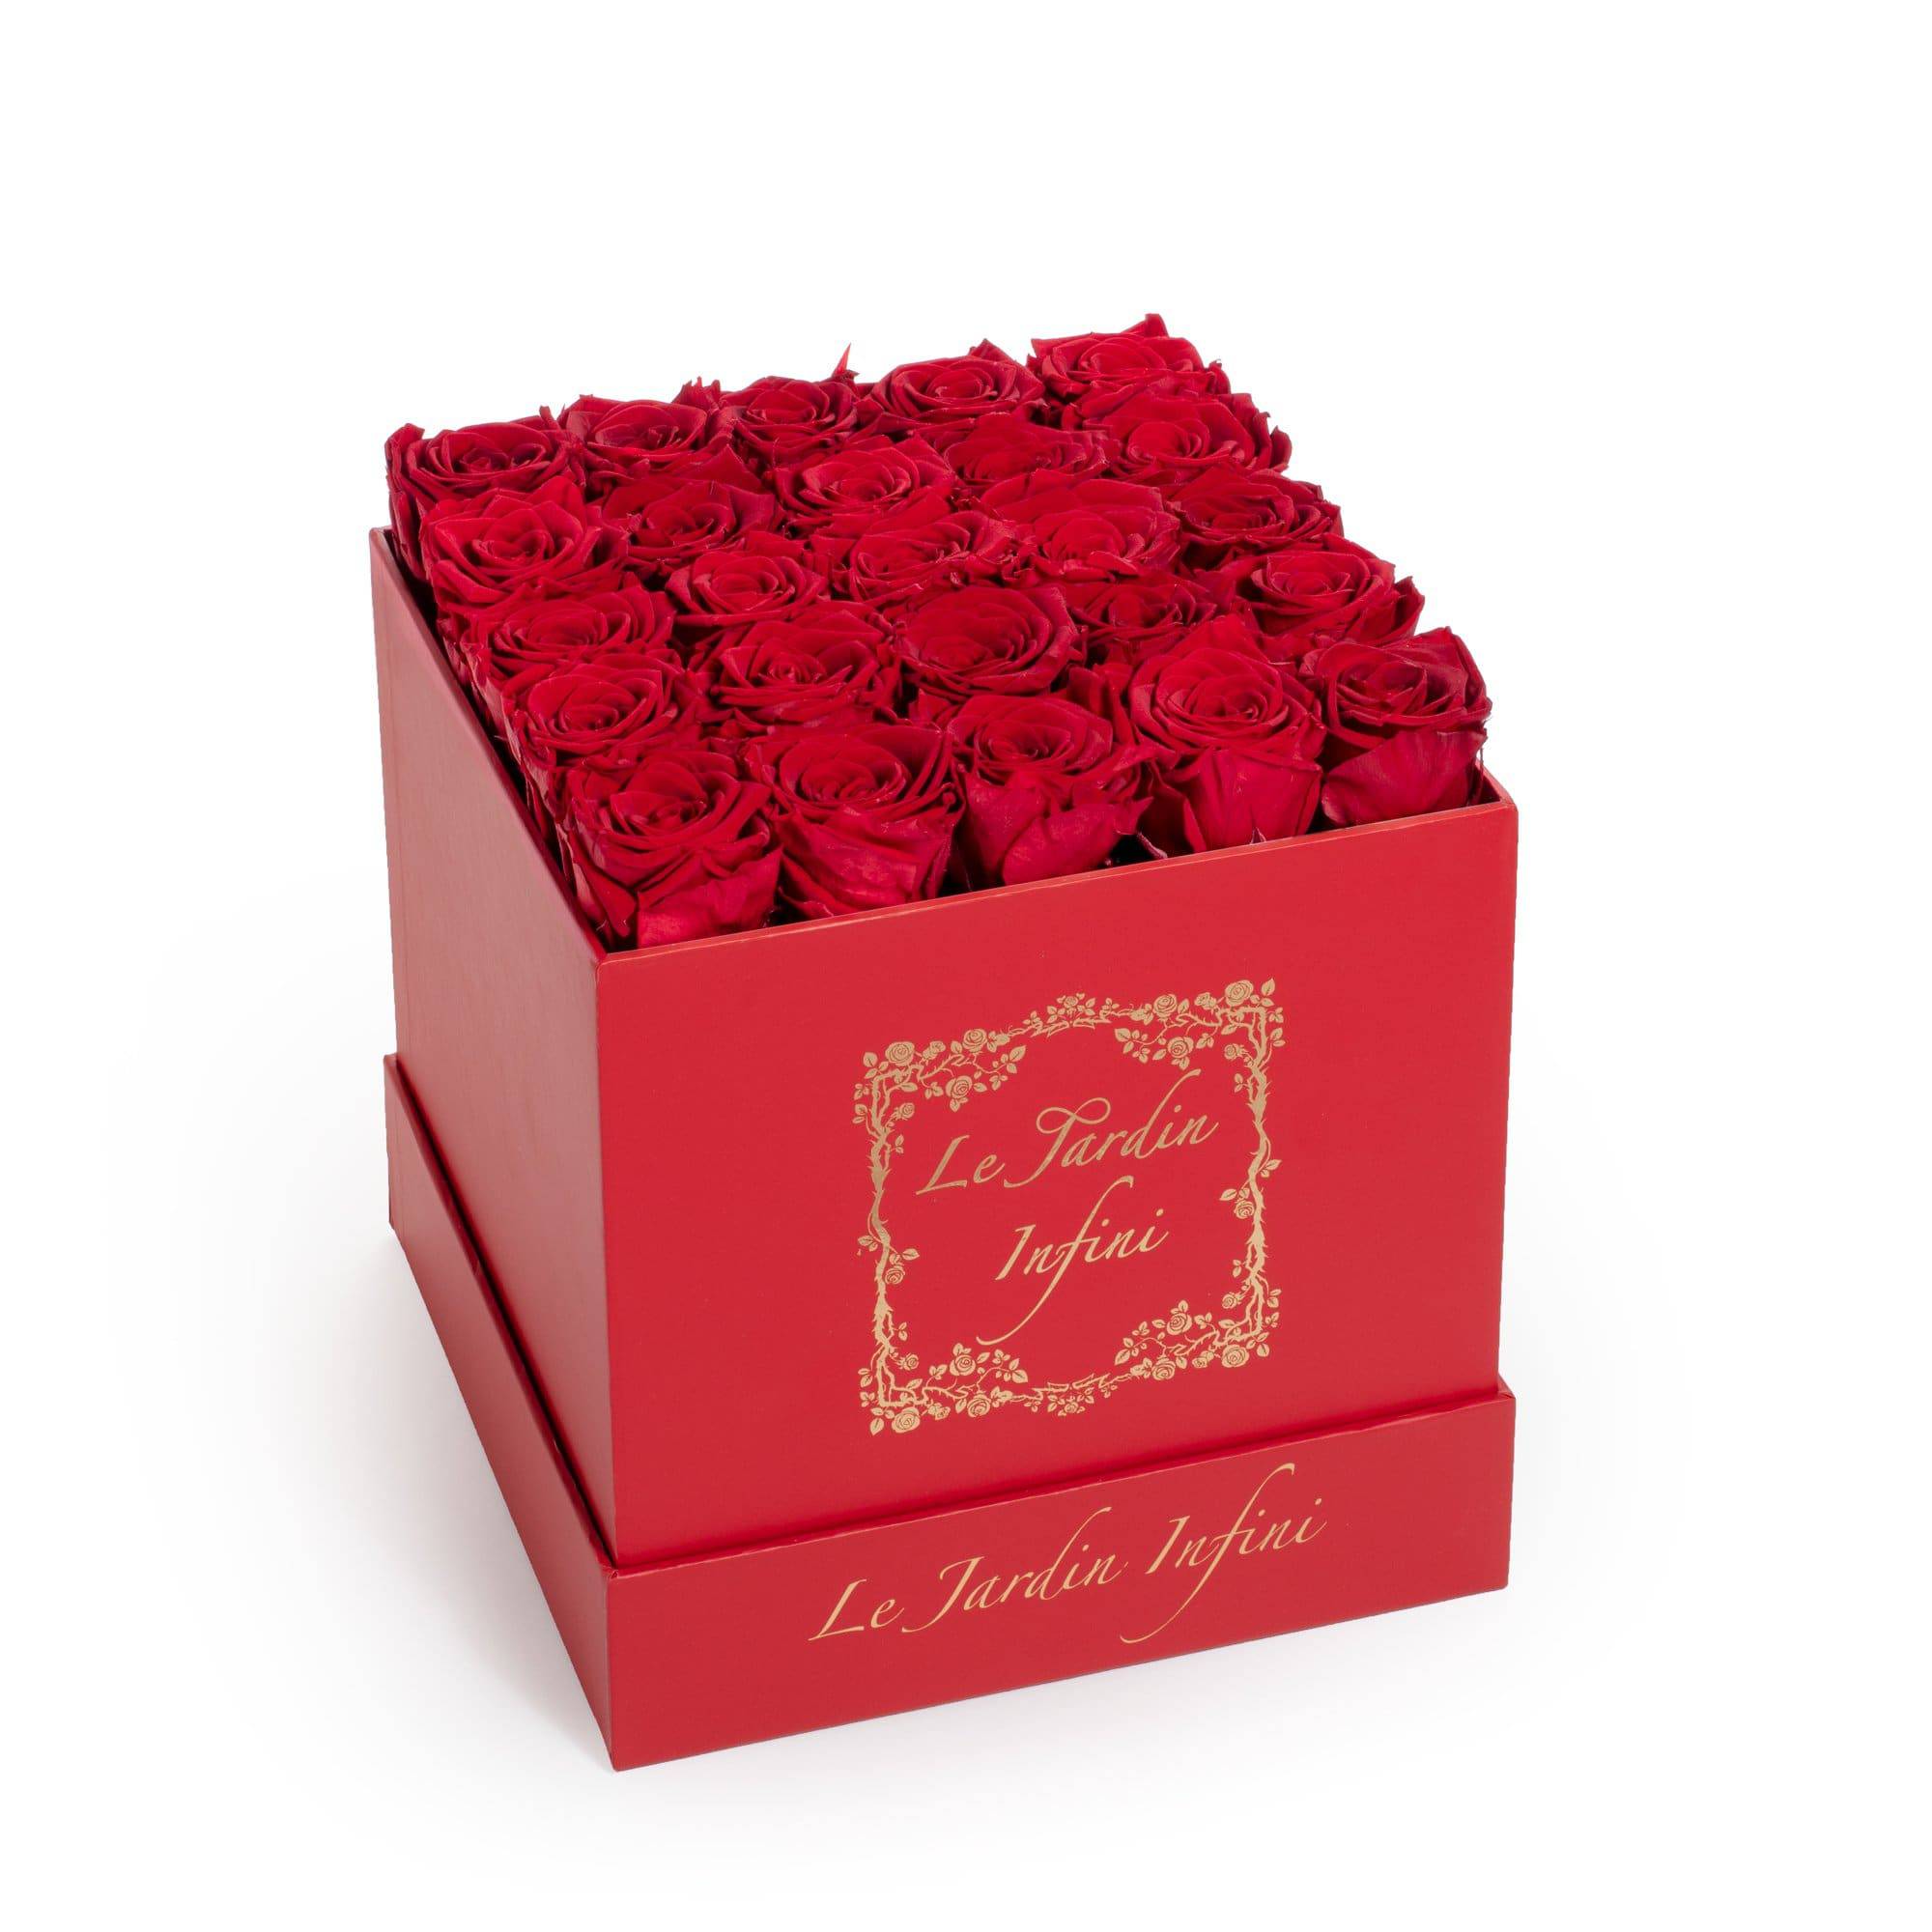 Red Preserved Roses - Medium Square Red Box - Le Jardin Infini Roses in a Box